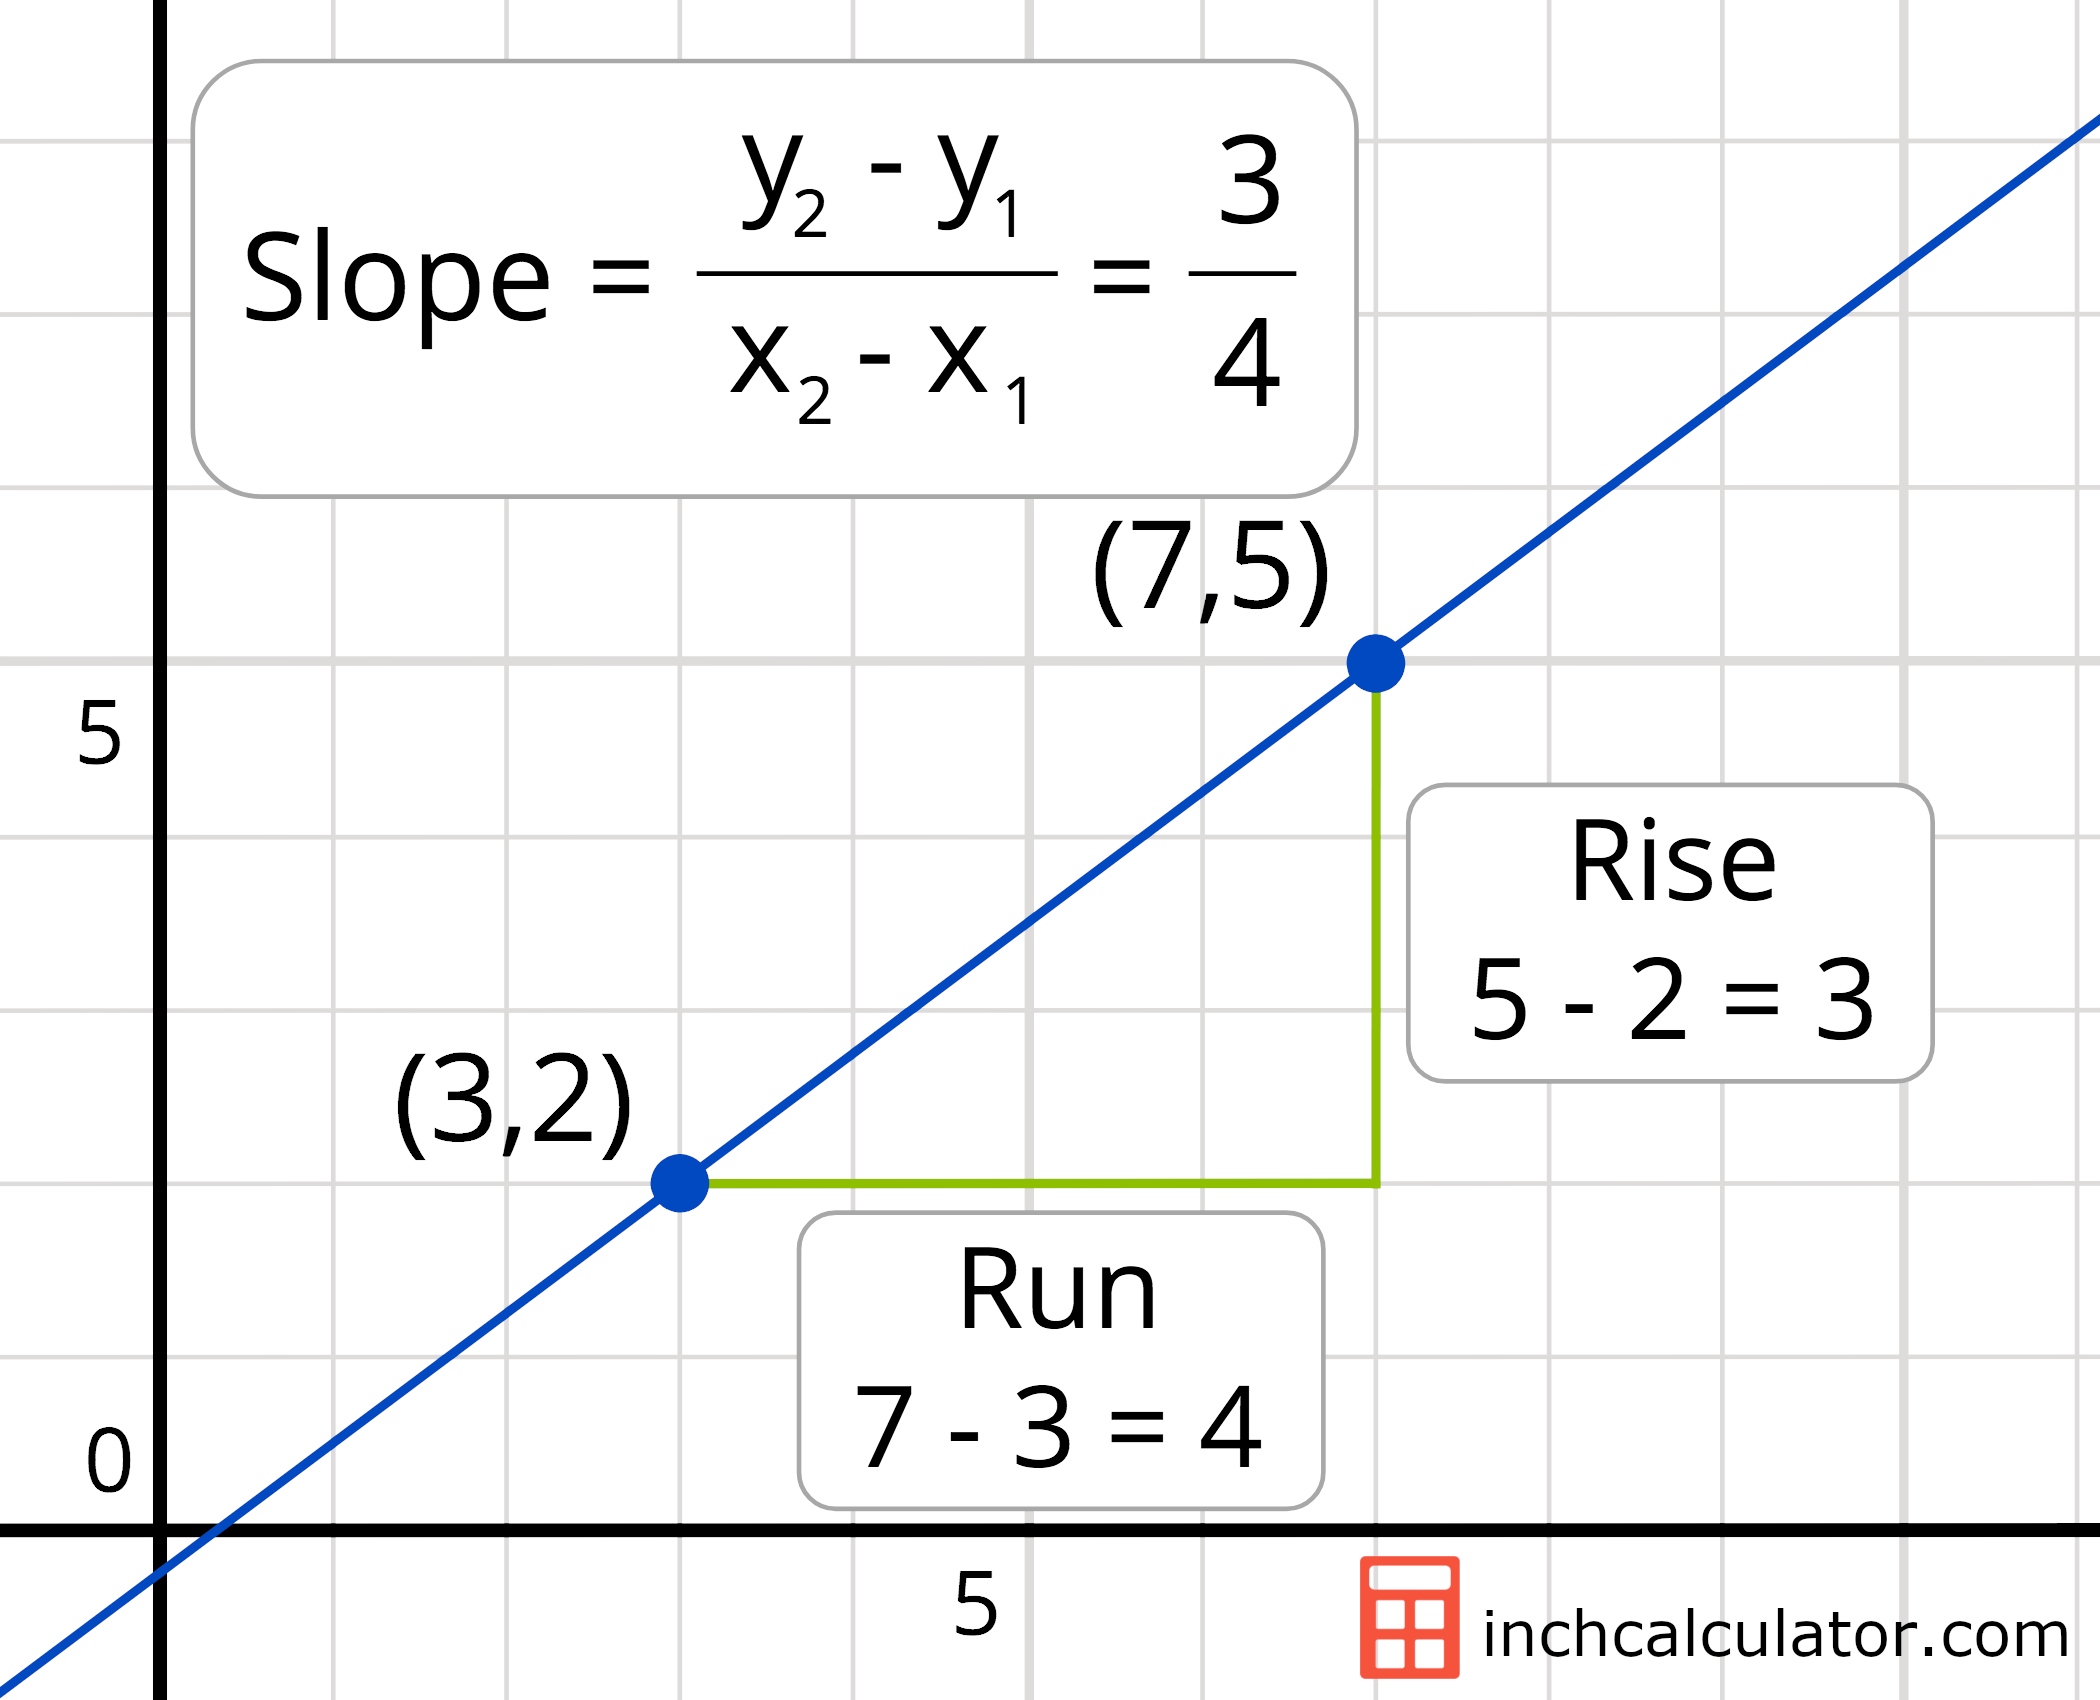 graph showing how to solve the slope of a line passing through coordinates (3,2) and (7,5)